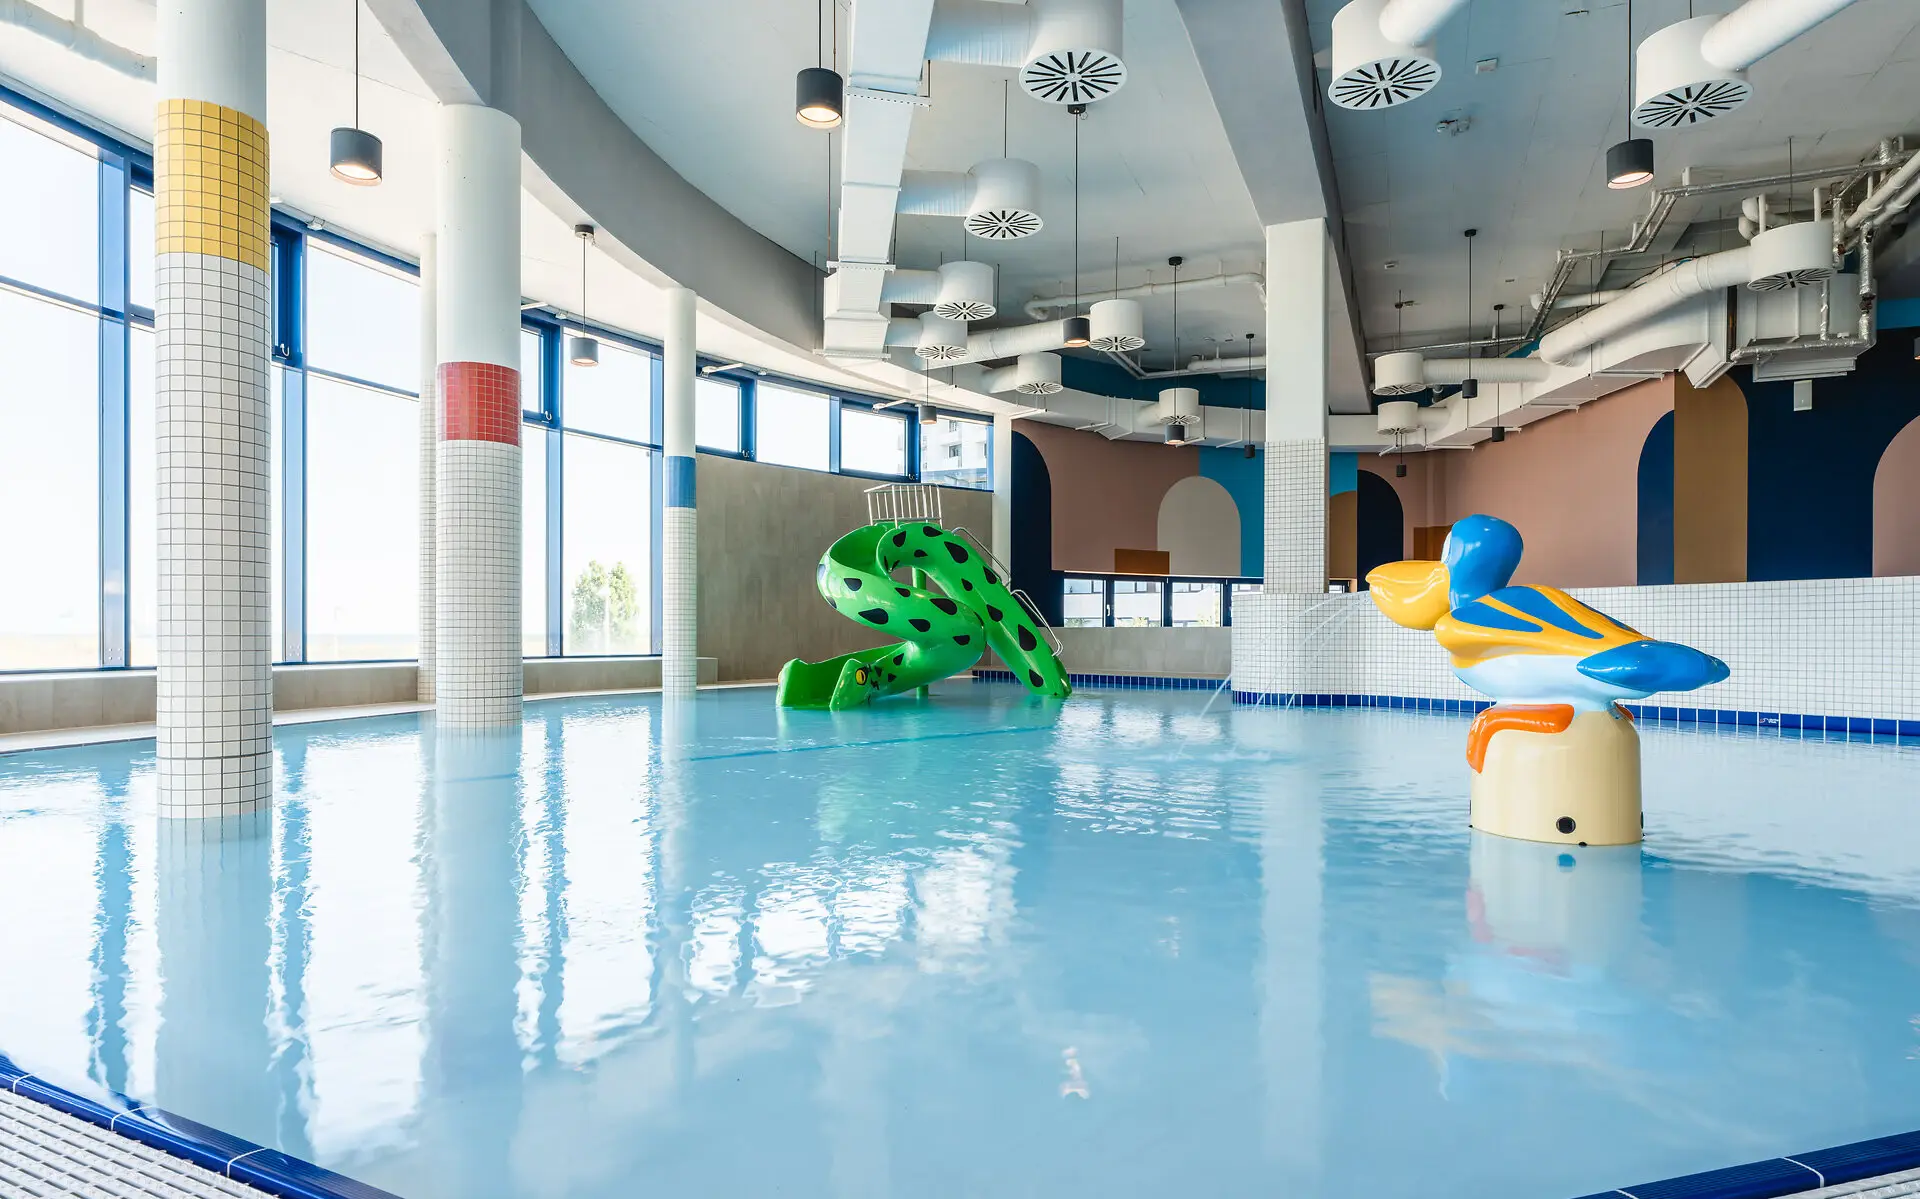 Large indoor swimming pool with a water slide and vibrant blue water.